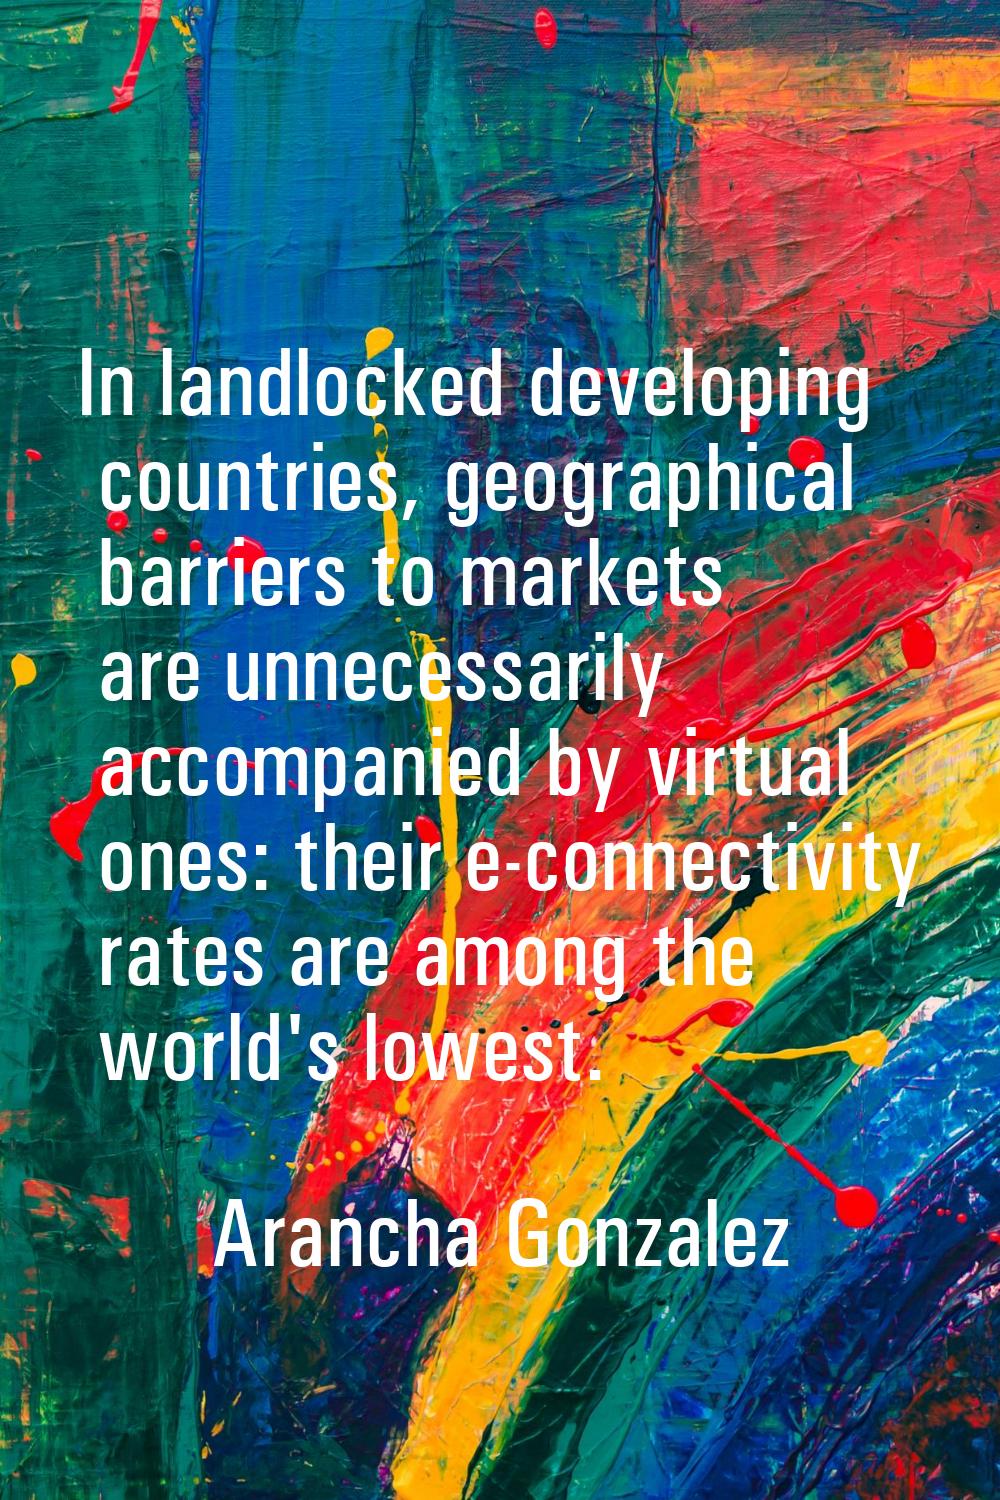 In landlocked developing countries, geographical barriers to markets are unnecessarily accompanied 